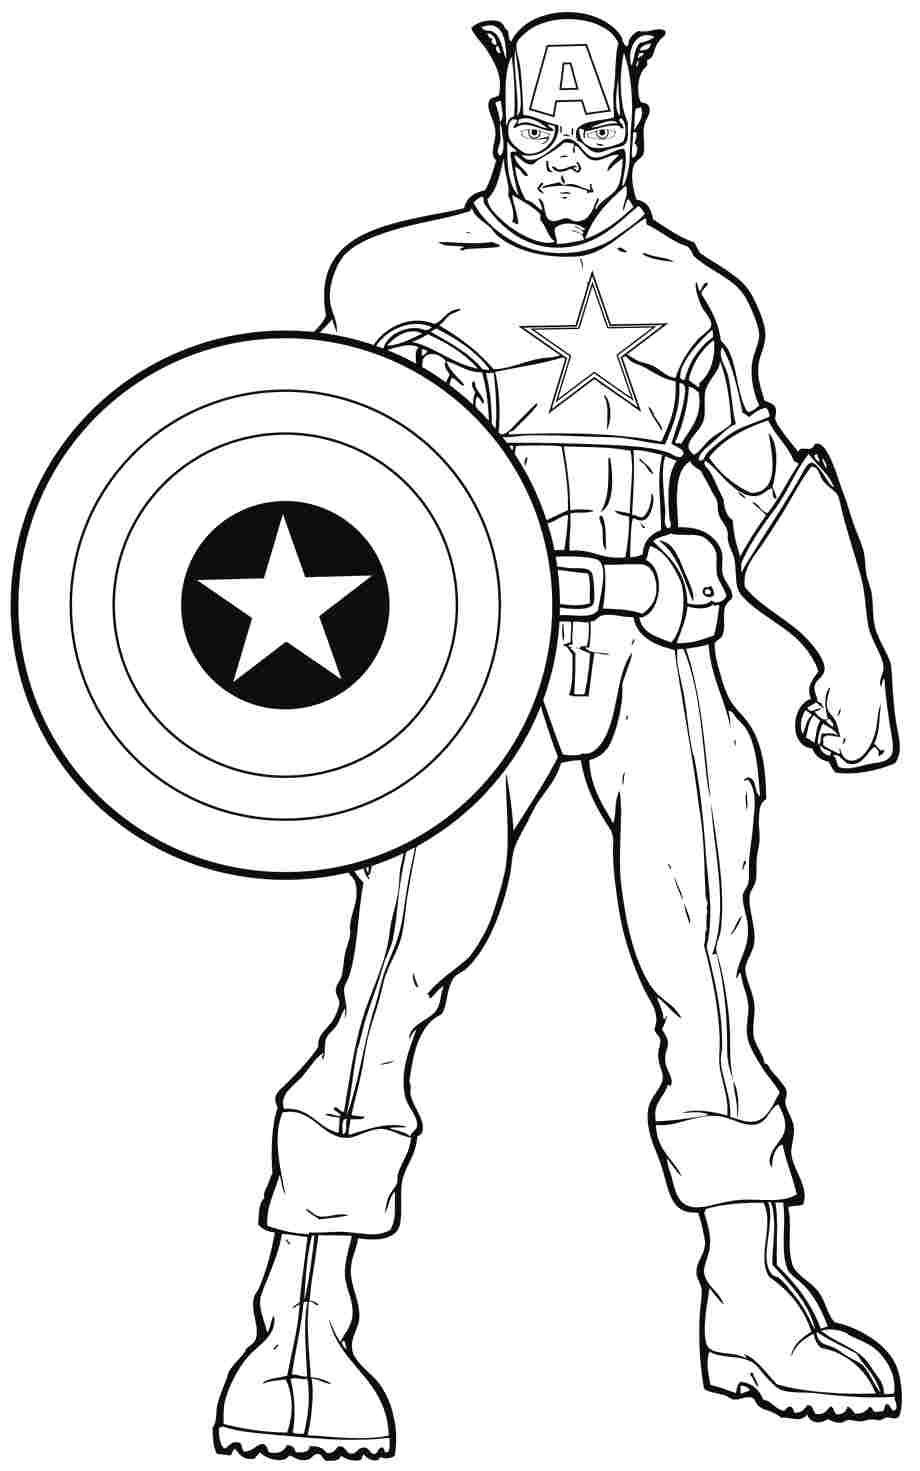 Coloring Pages Ideas: Freeintable Superhero Coloring Pages Marvel - Free Printable Superhero Coloring Pages